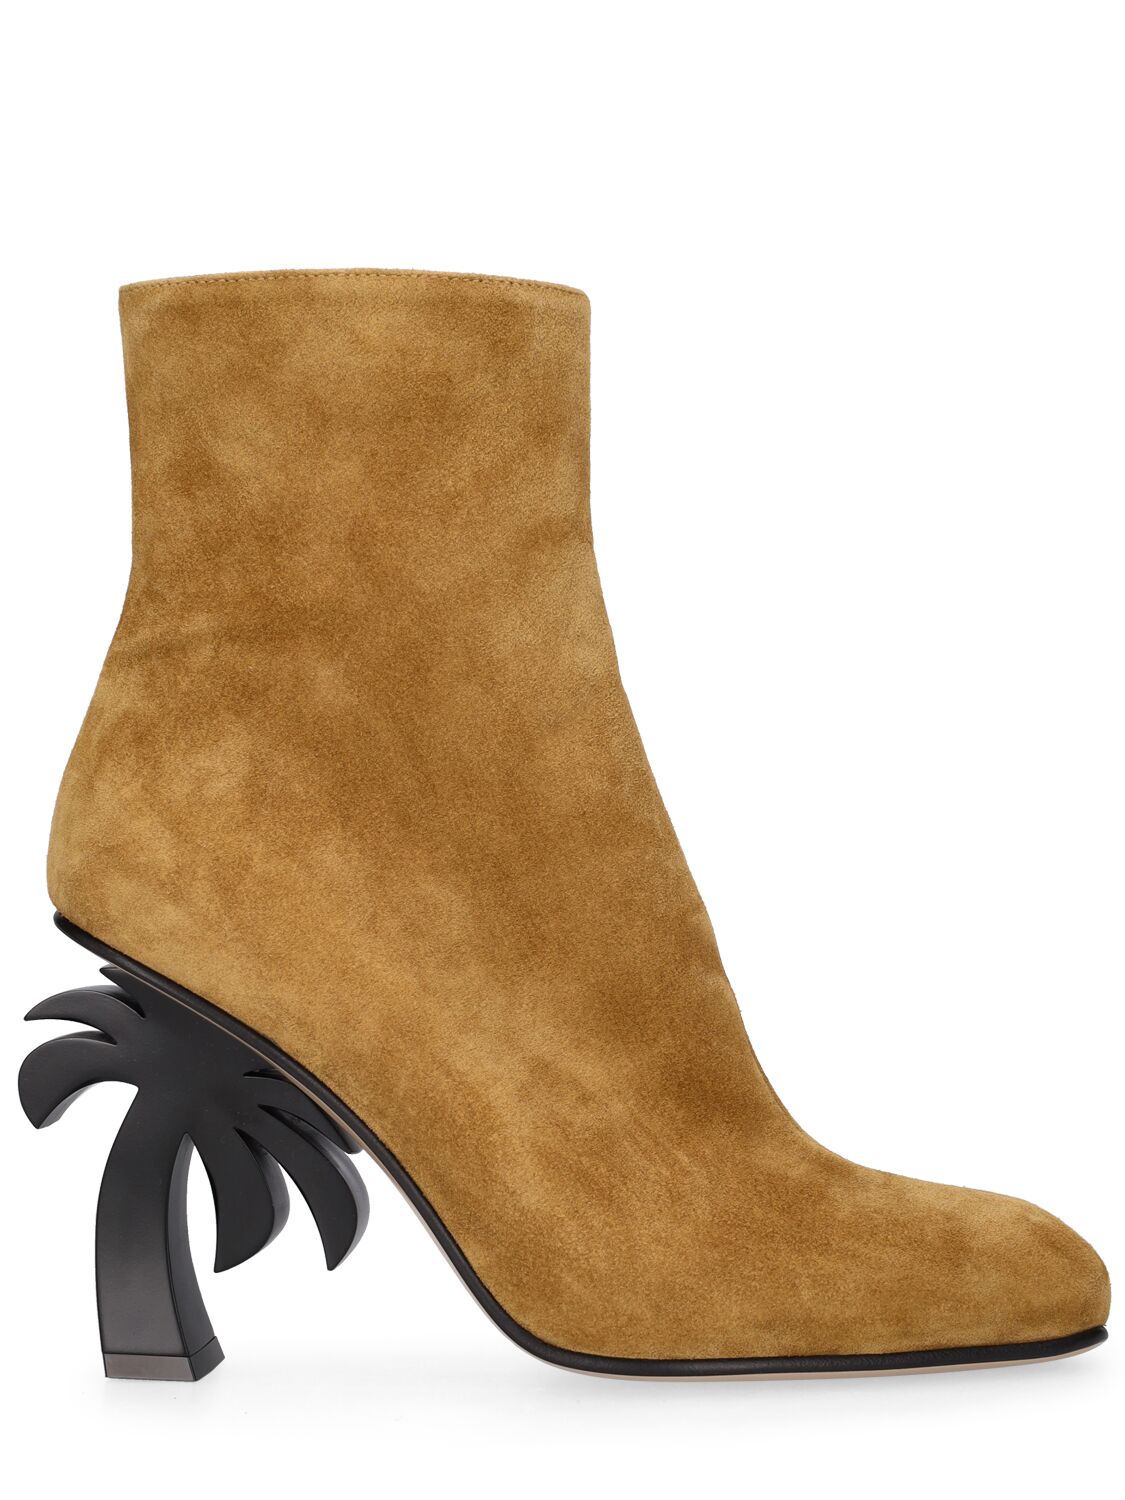 110mm Palm Heel Suede Ankle Boots